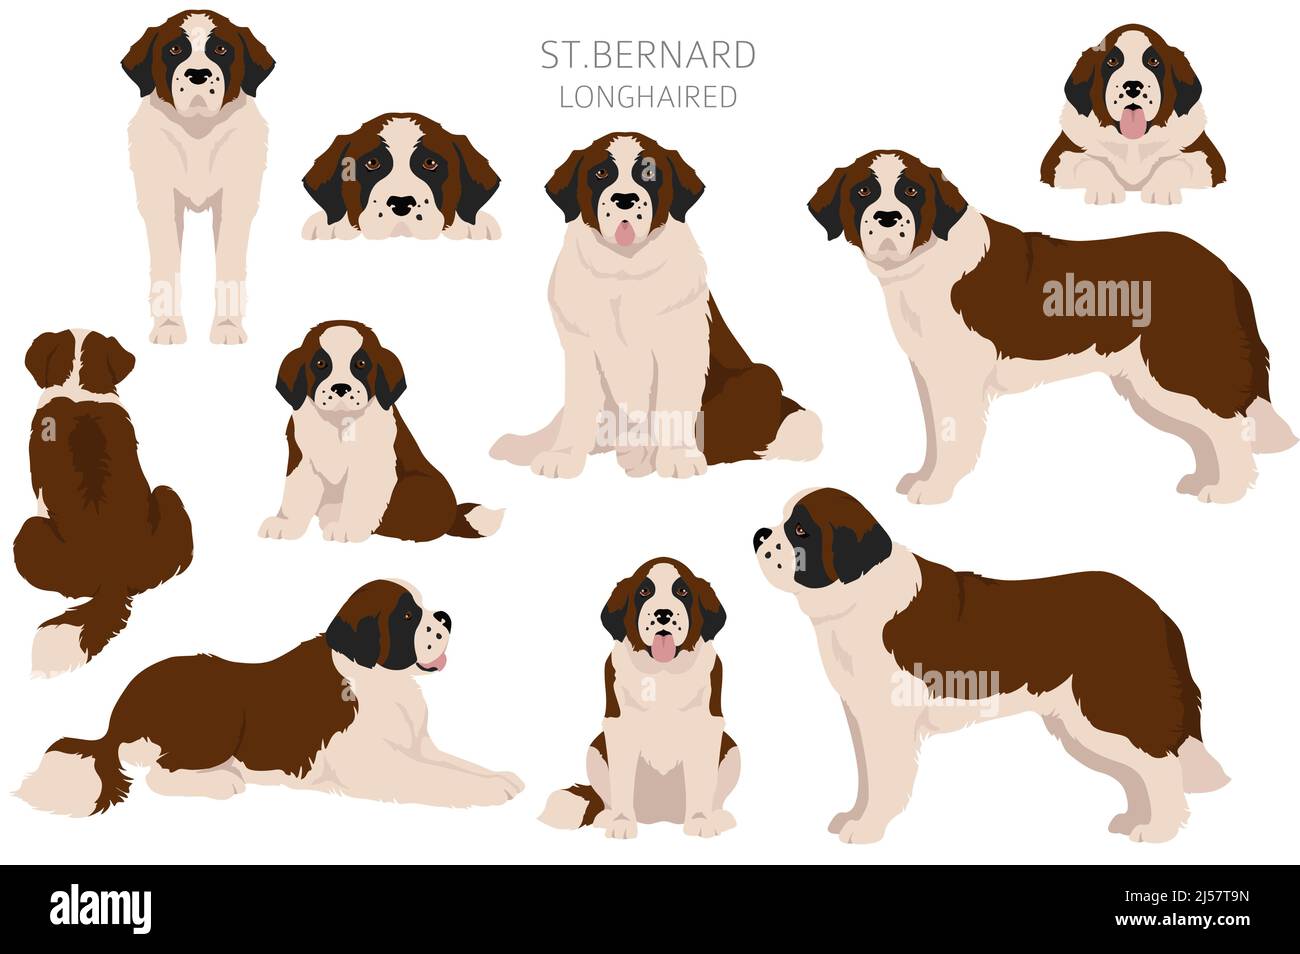 St Bernard longhaired coat colors, different poses clipart.  Vector illustration Stock Vector